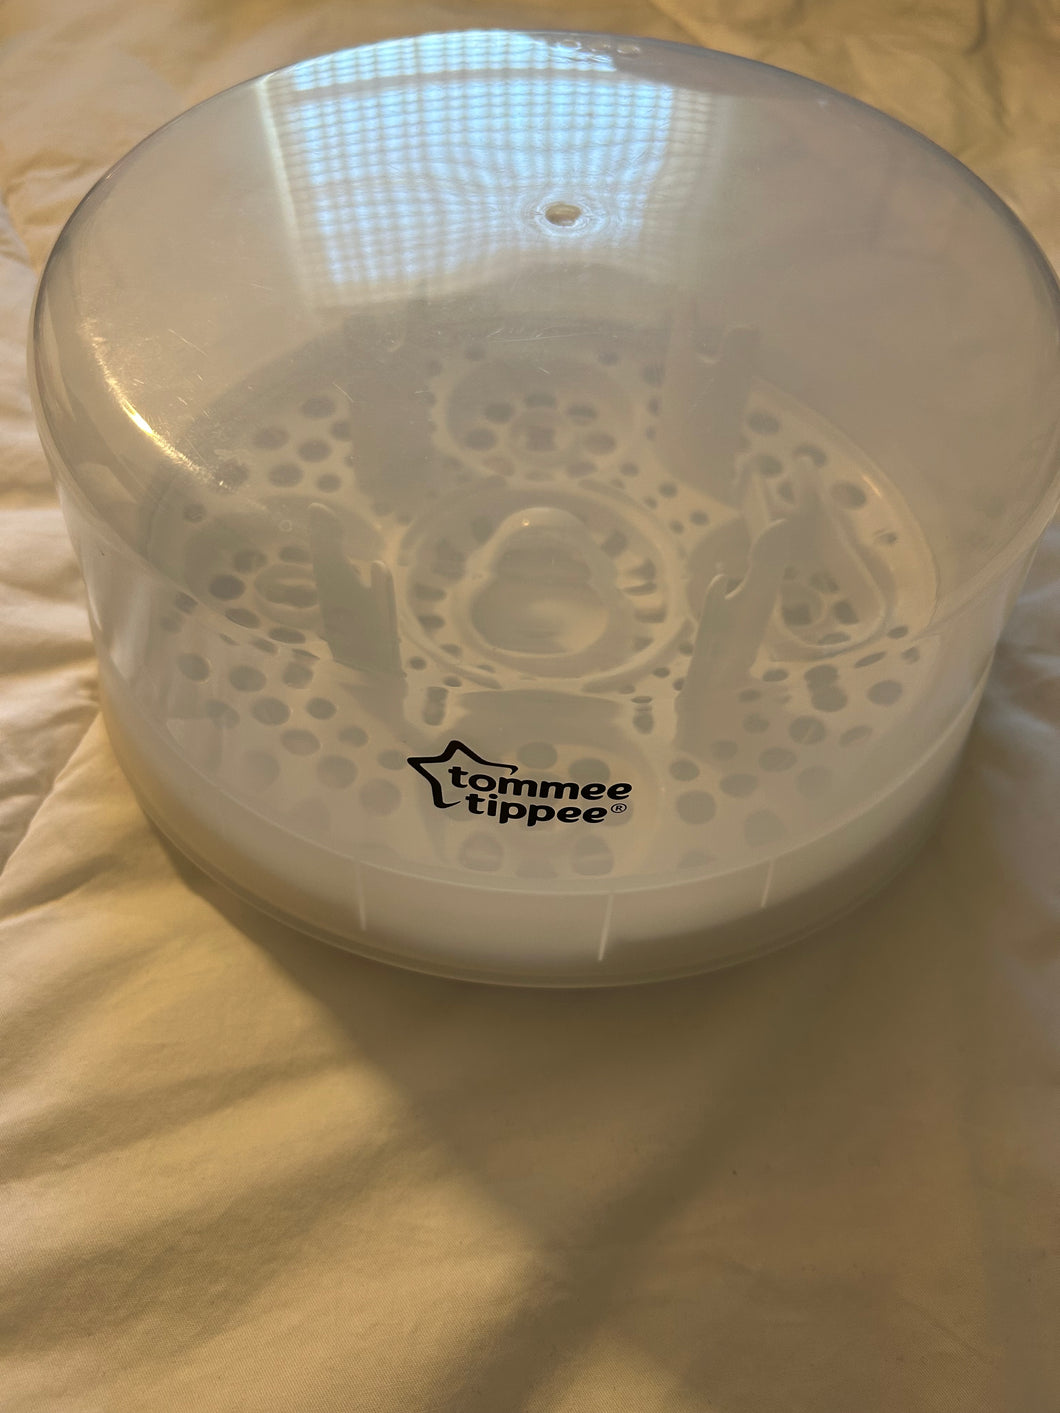 Tommee Tippee Bottle Cleaner Sterilizer